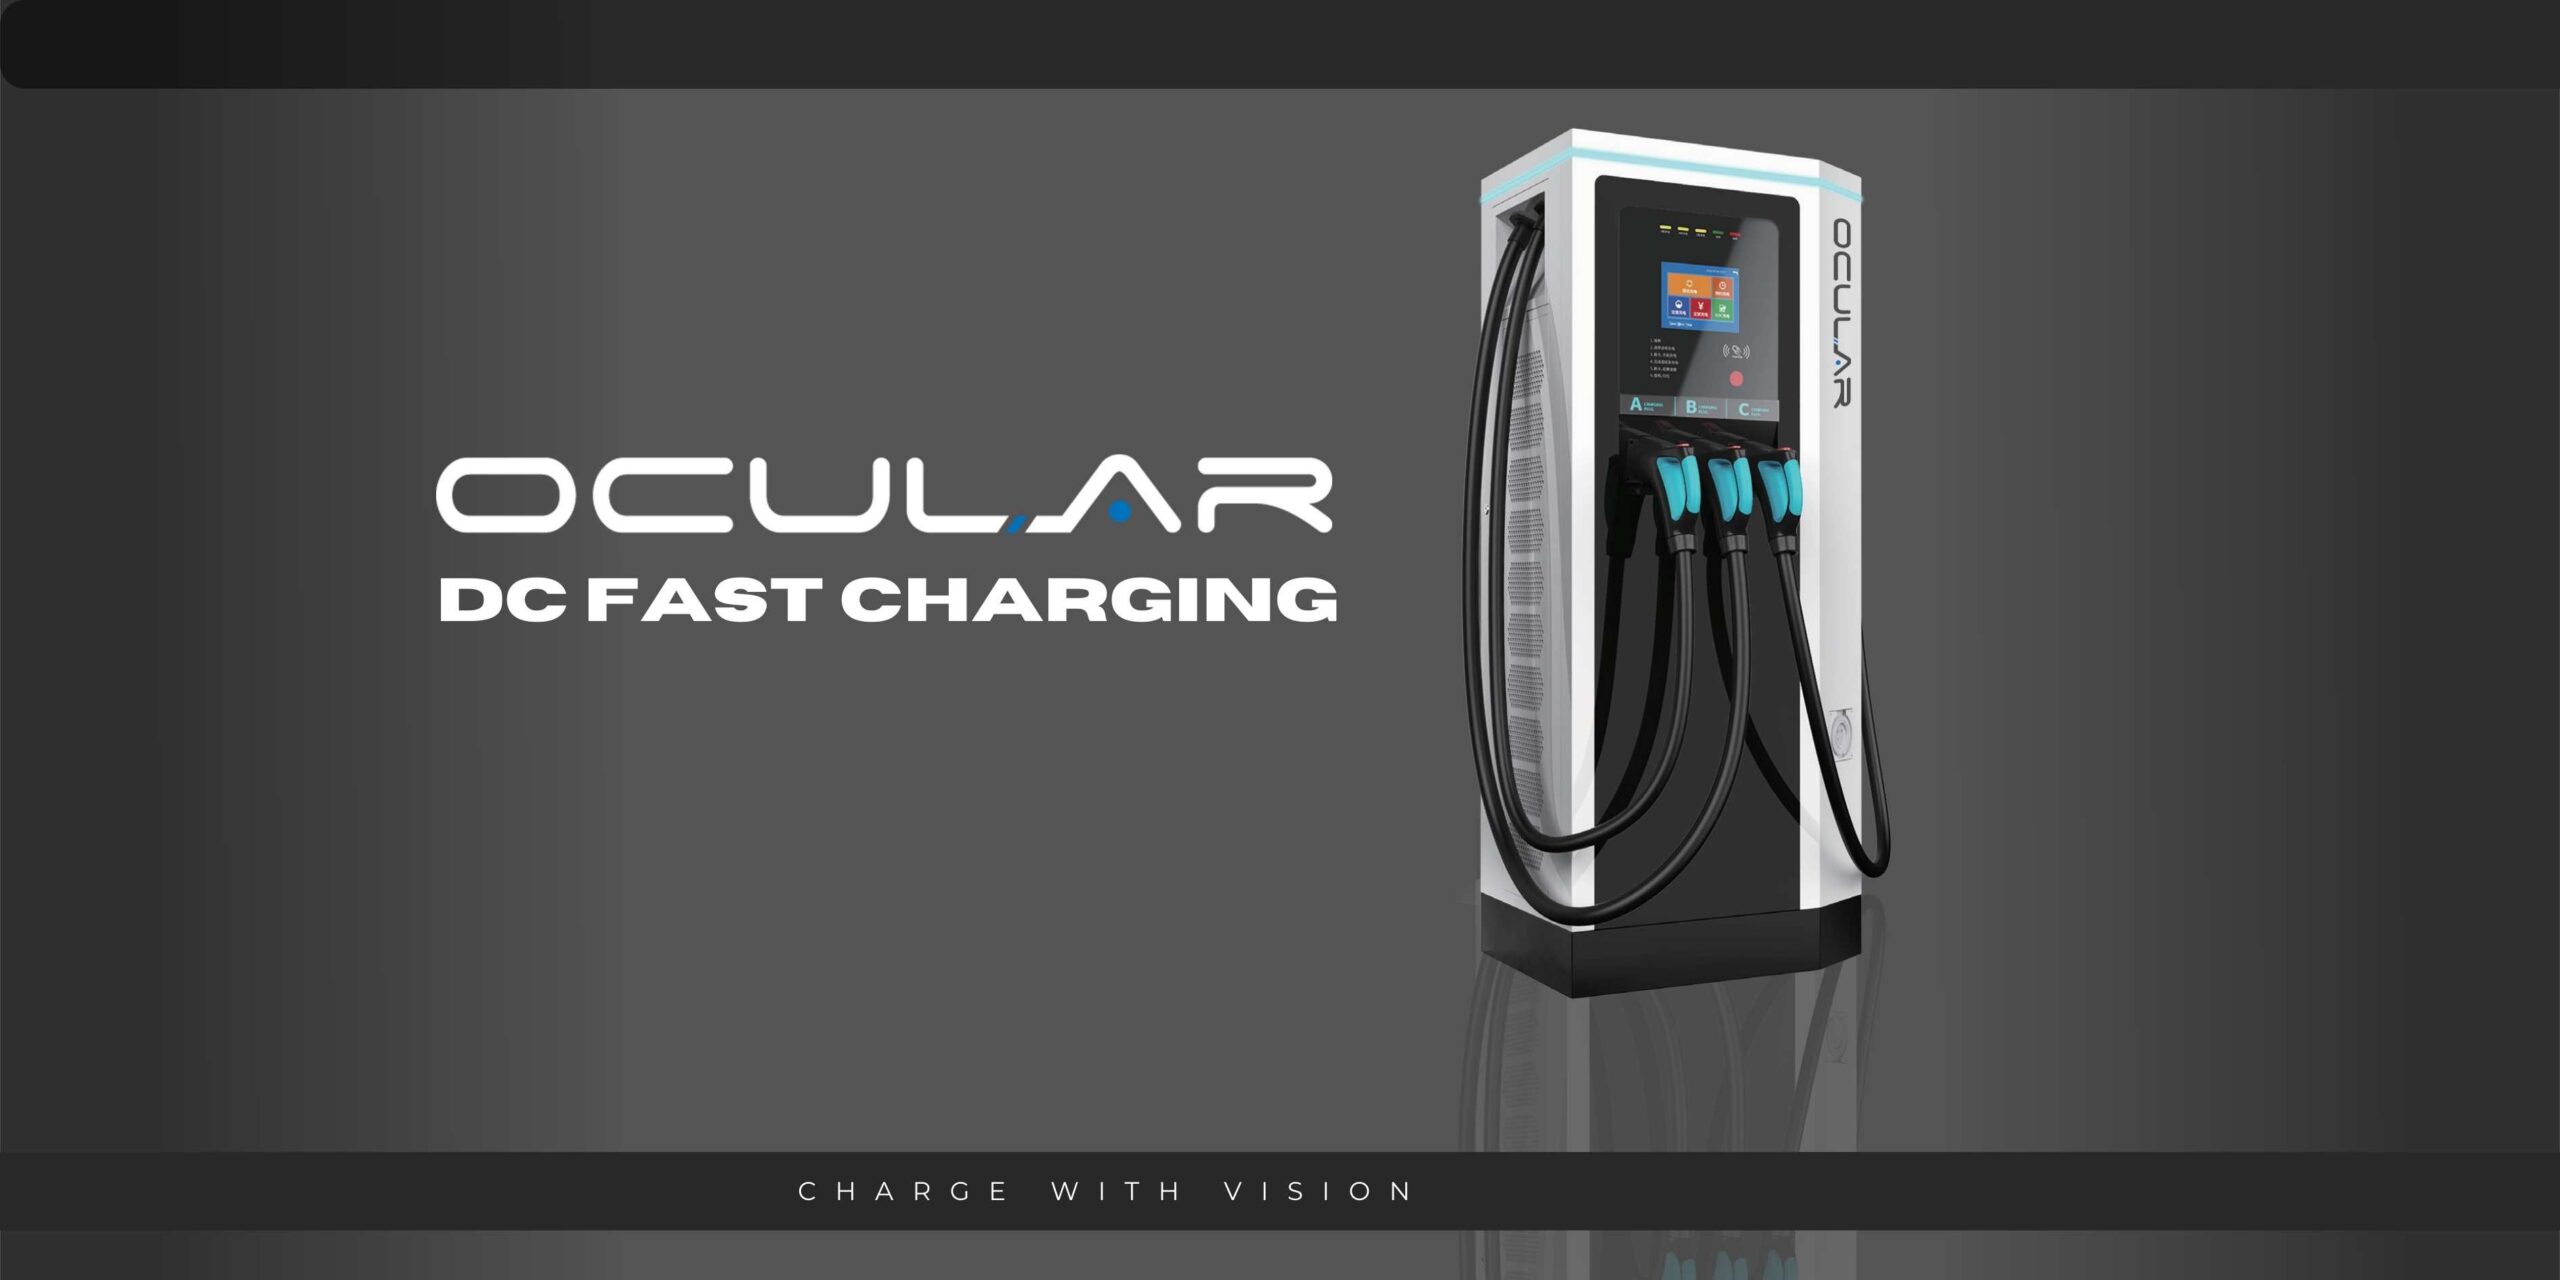 DC Fast Charging Explained